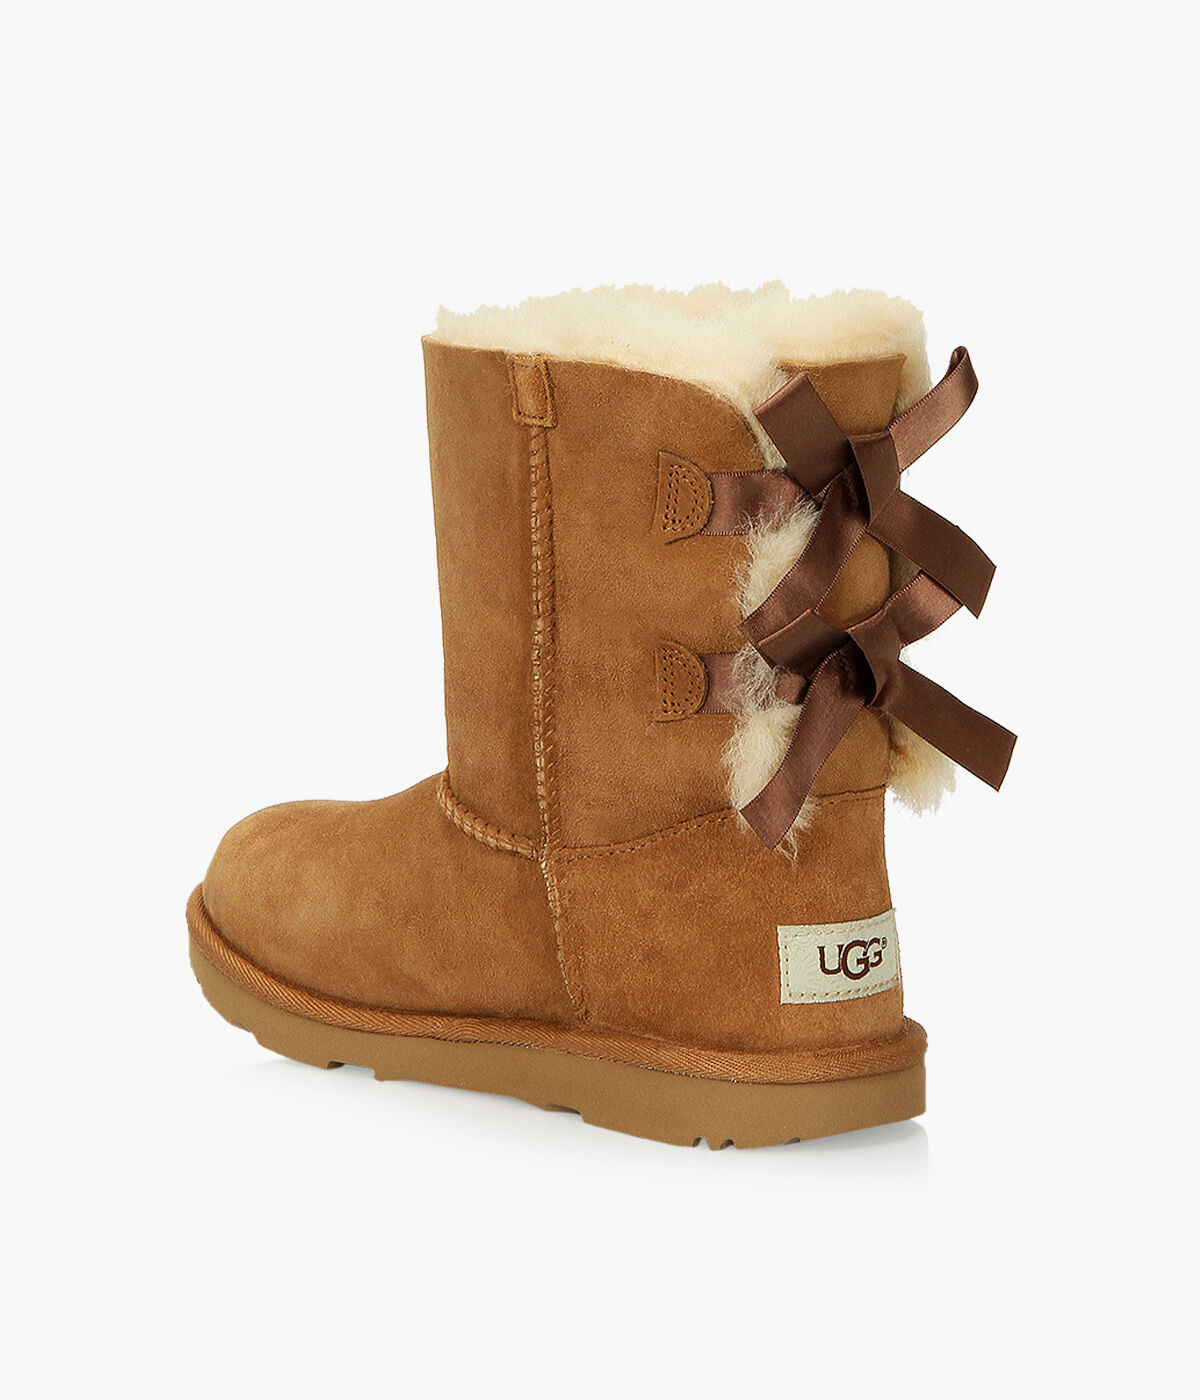 brown ugg boots with bows